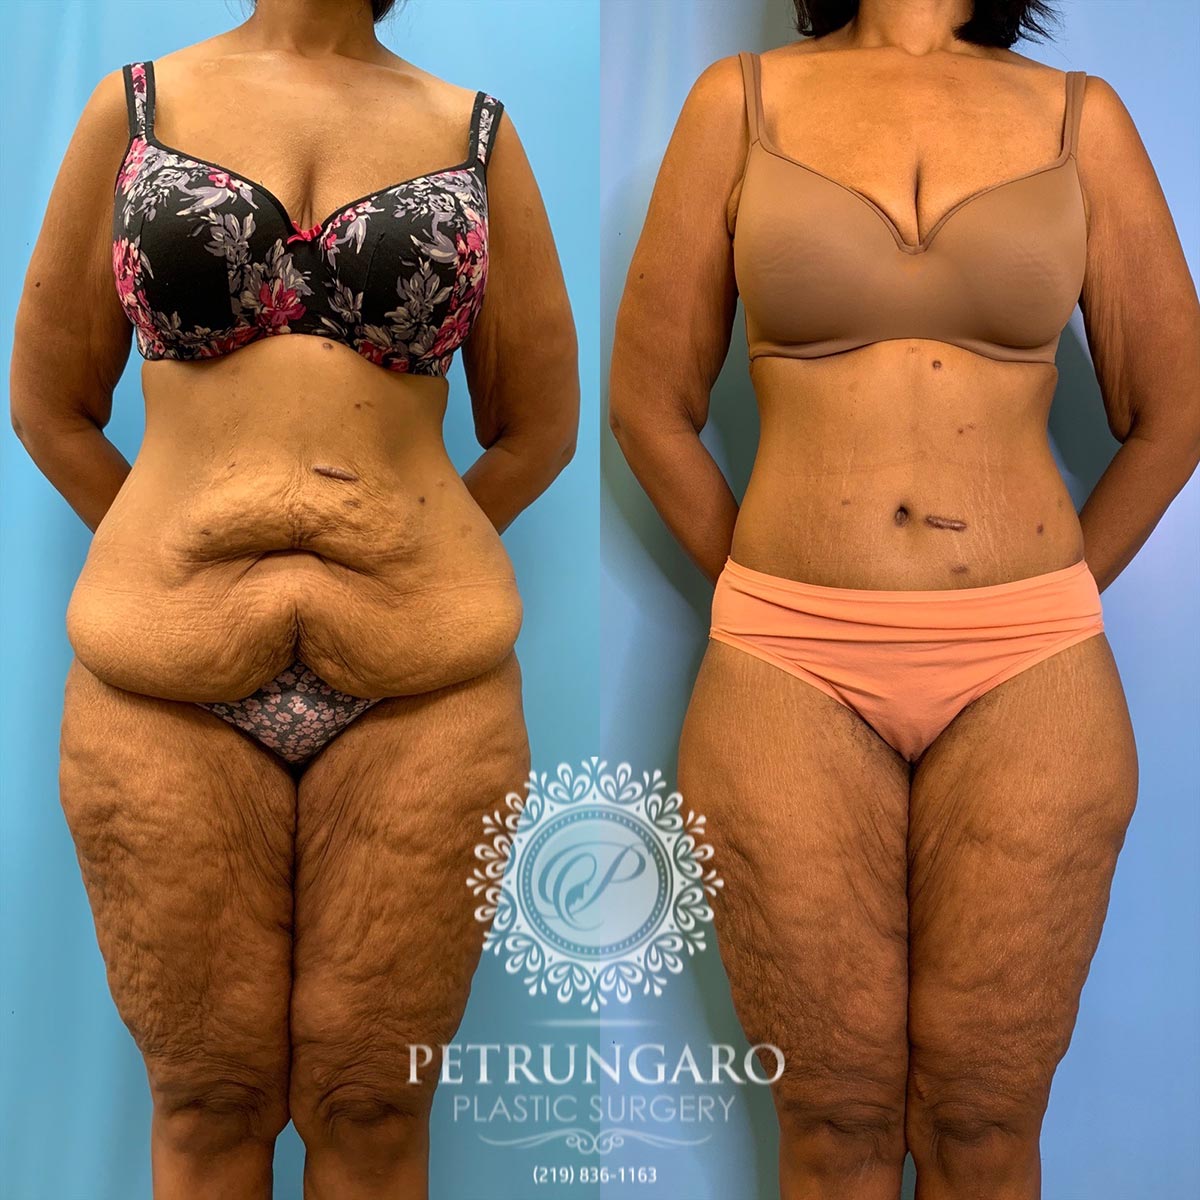 42 year old woman 3 months after a circumferential body lift-1